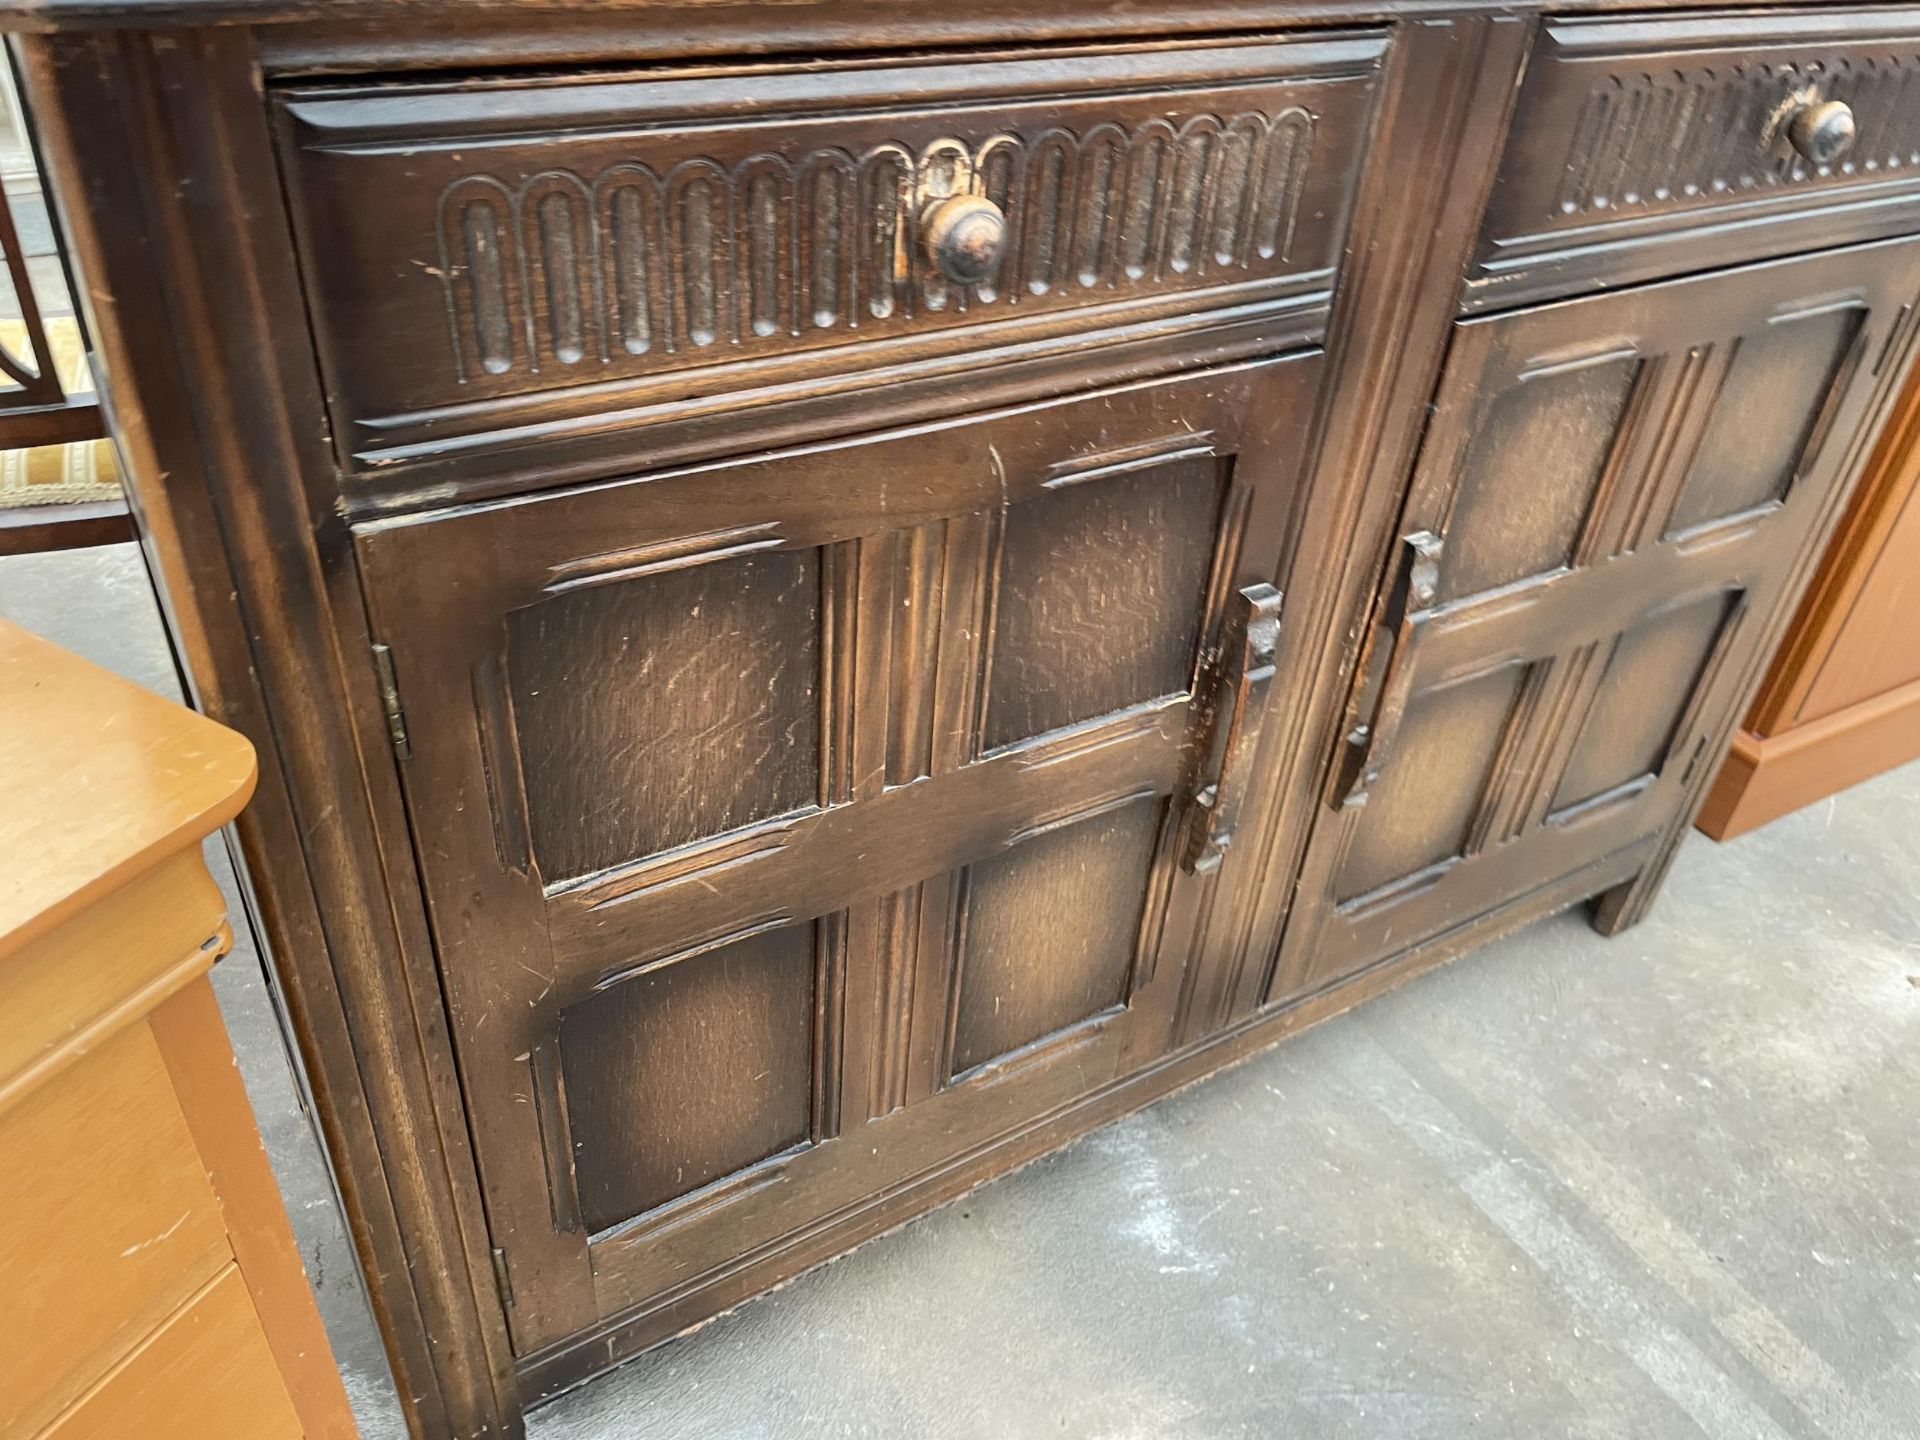 A REPRODUCTION OAK DRESSER COMPLETE WITH PLATE RACK, 48" WIDE - Image 4 of 4